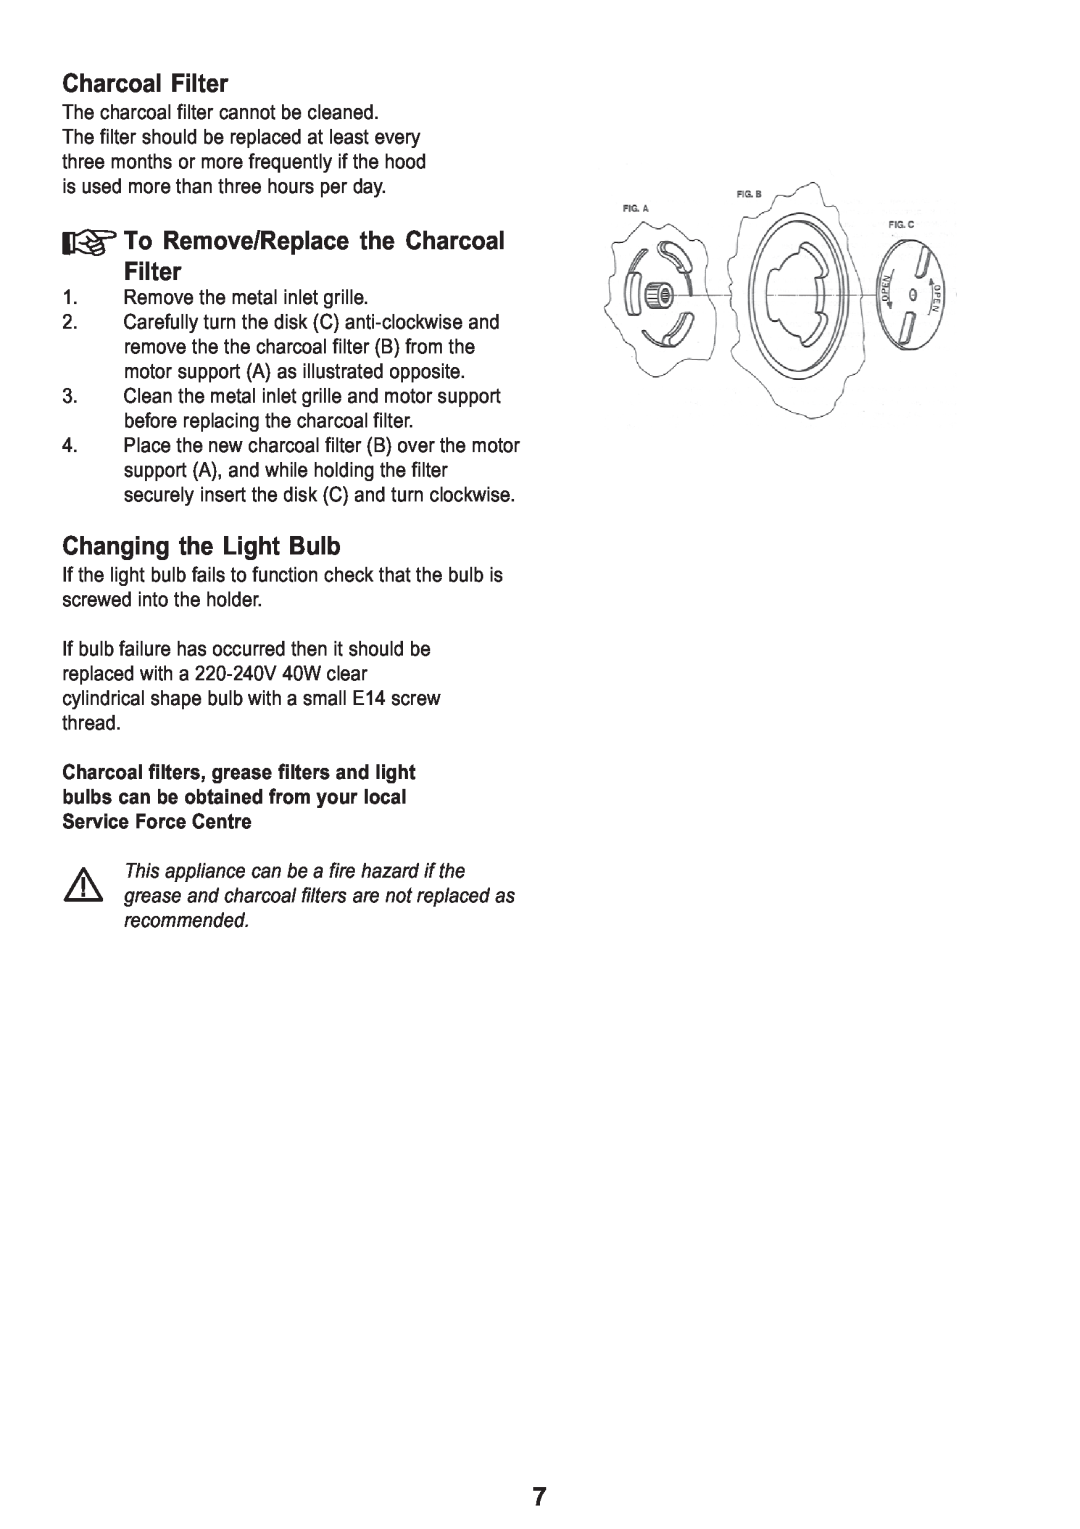 Electrolux MCH 660 manual To Remove/Replace the Charcoal Filter, Changing the Light Bulb 